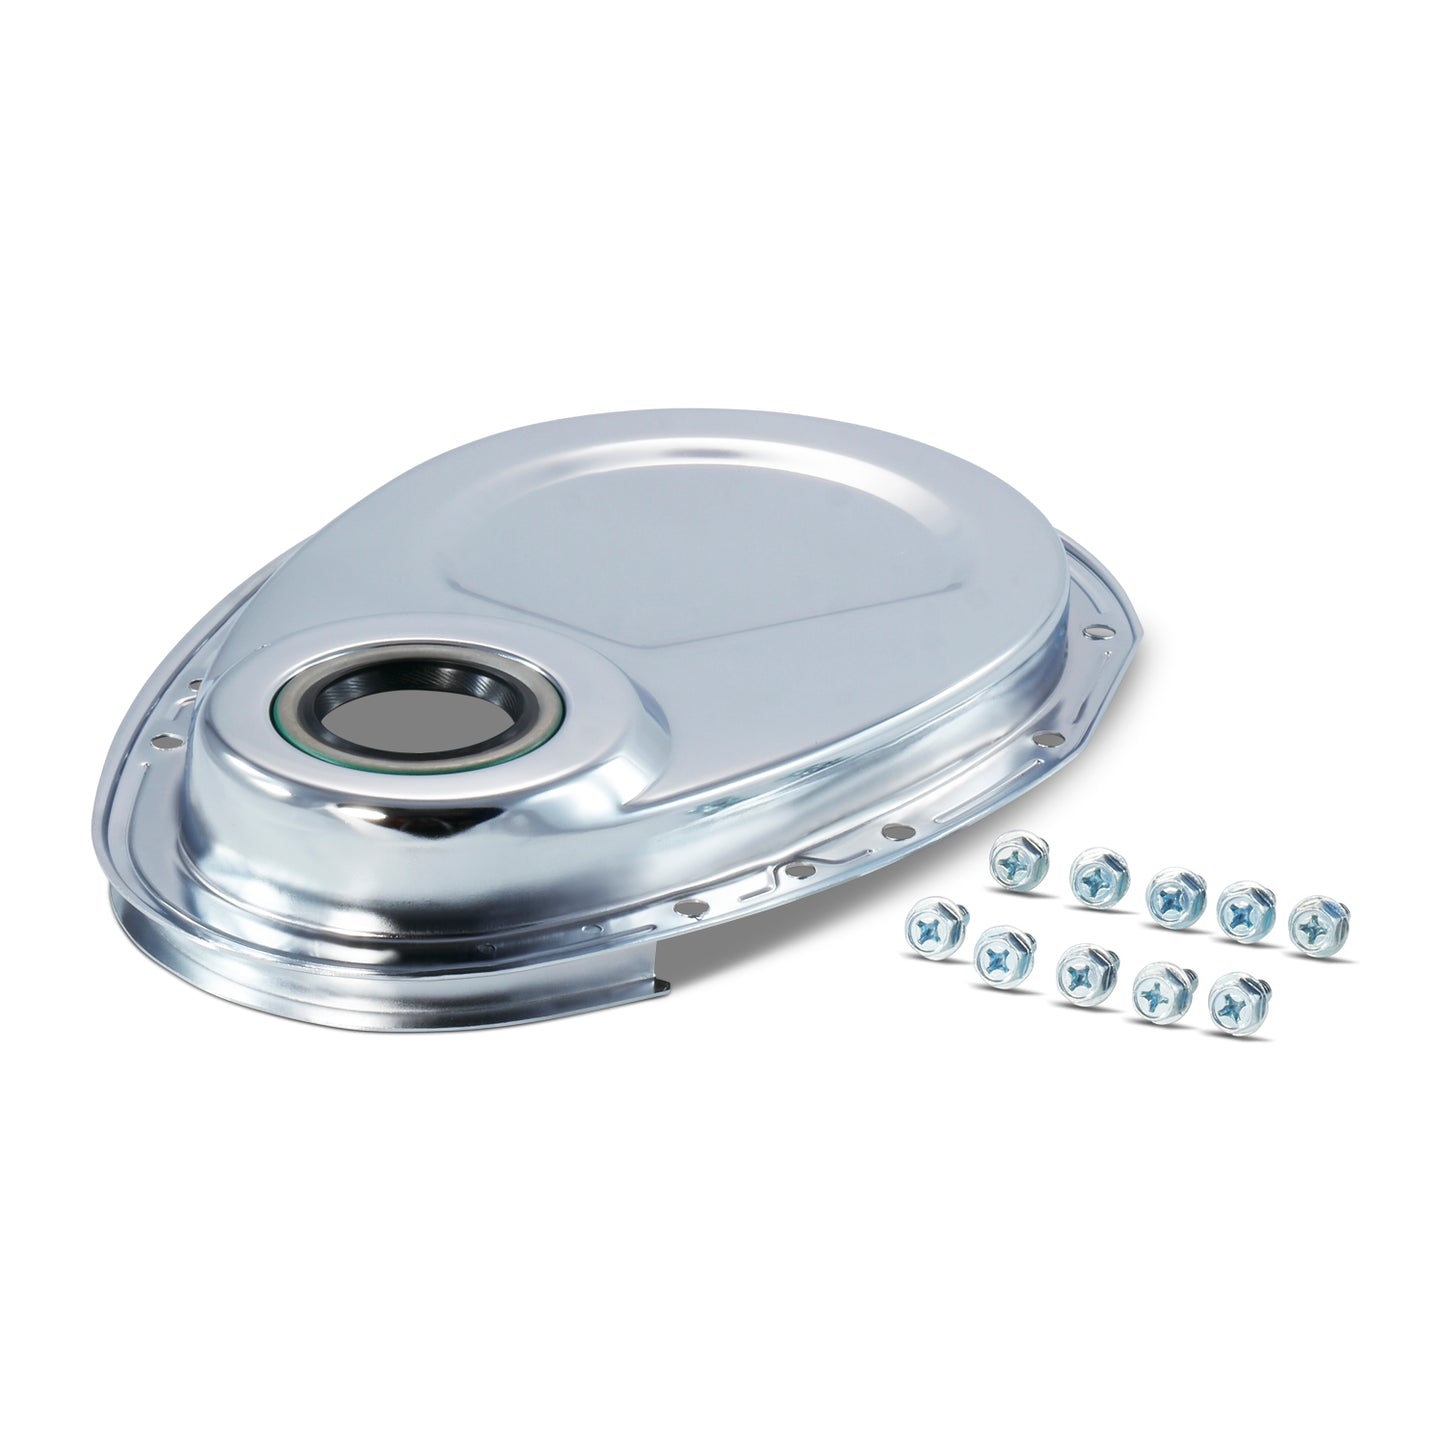 Proform Timing Chain Cover; Chrome; Steel; Fit SB Chevy 69-91; Crankshaft Seal Included 66151